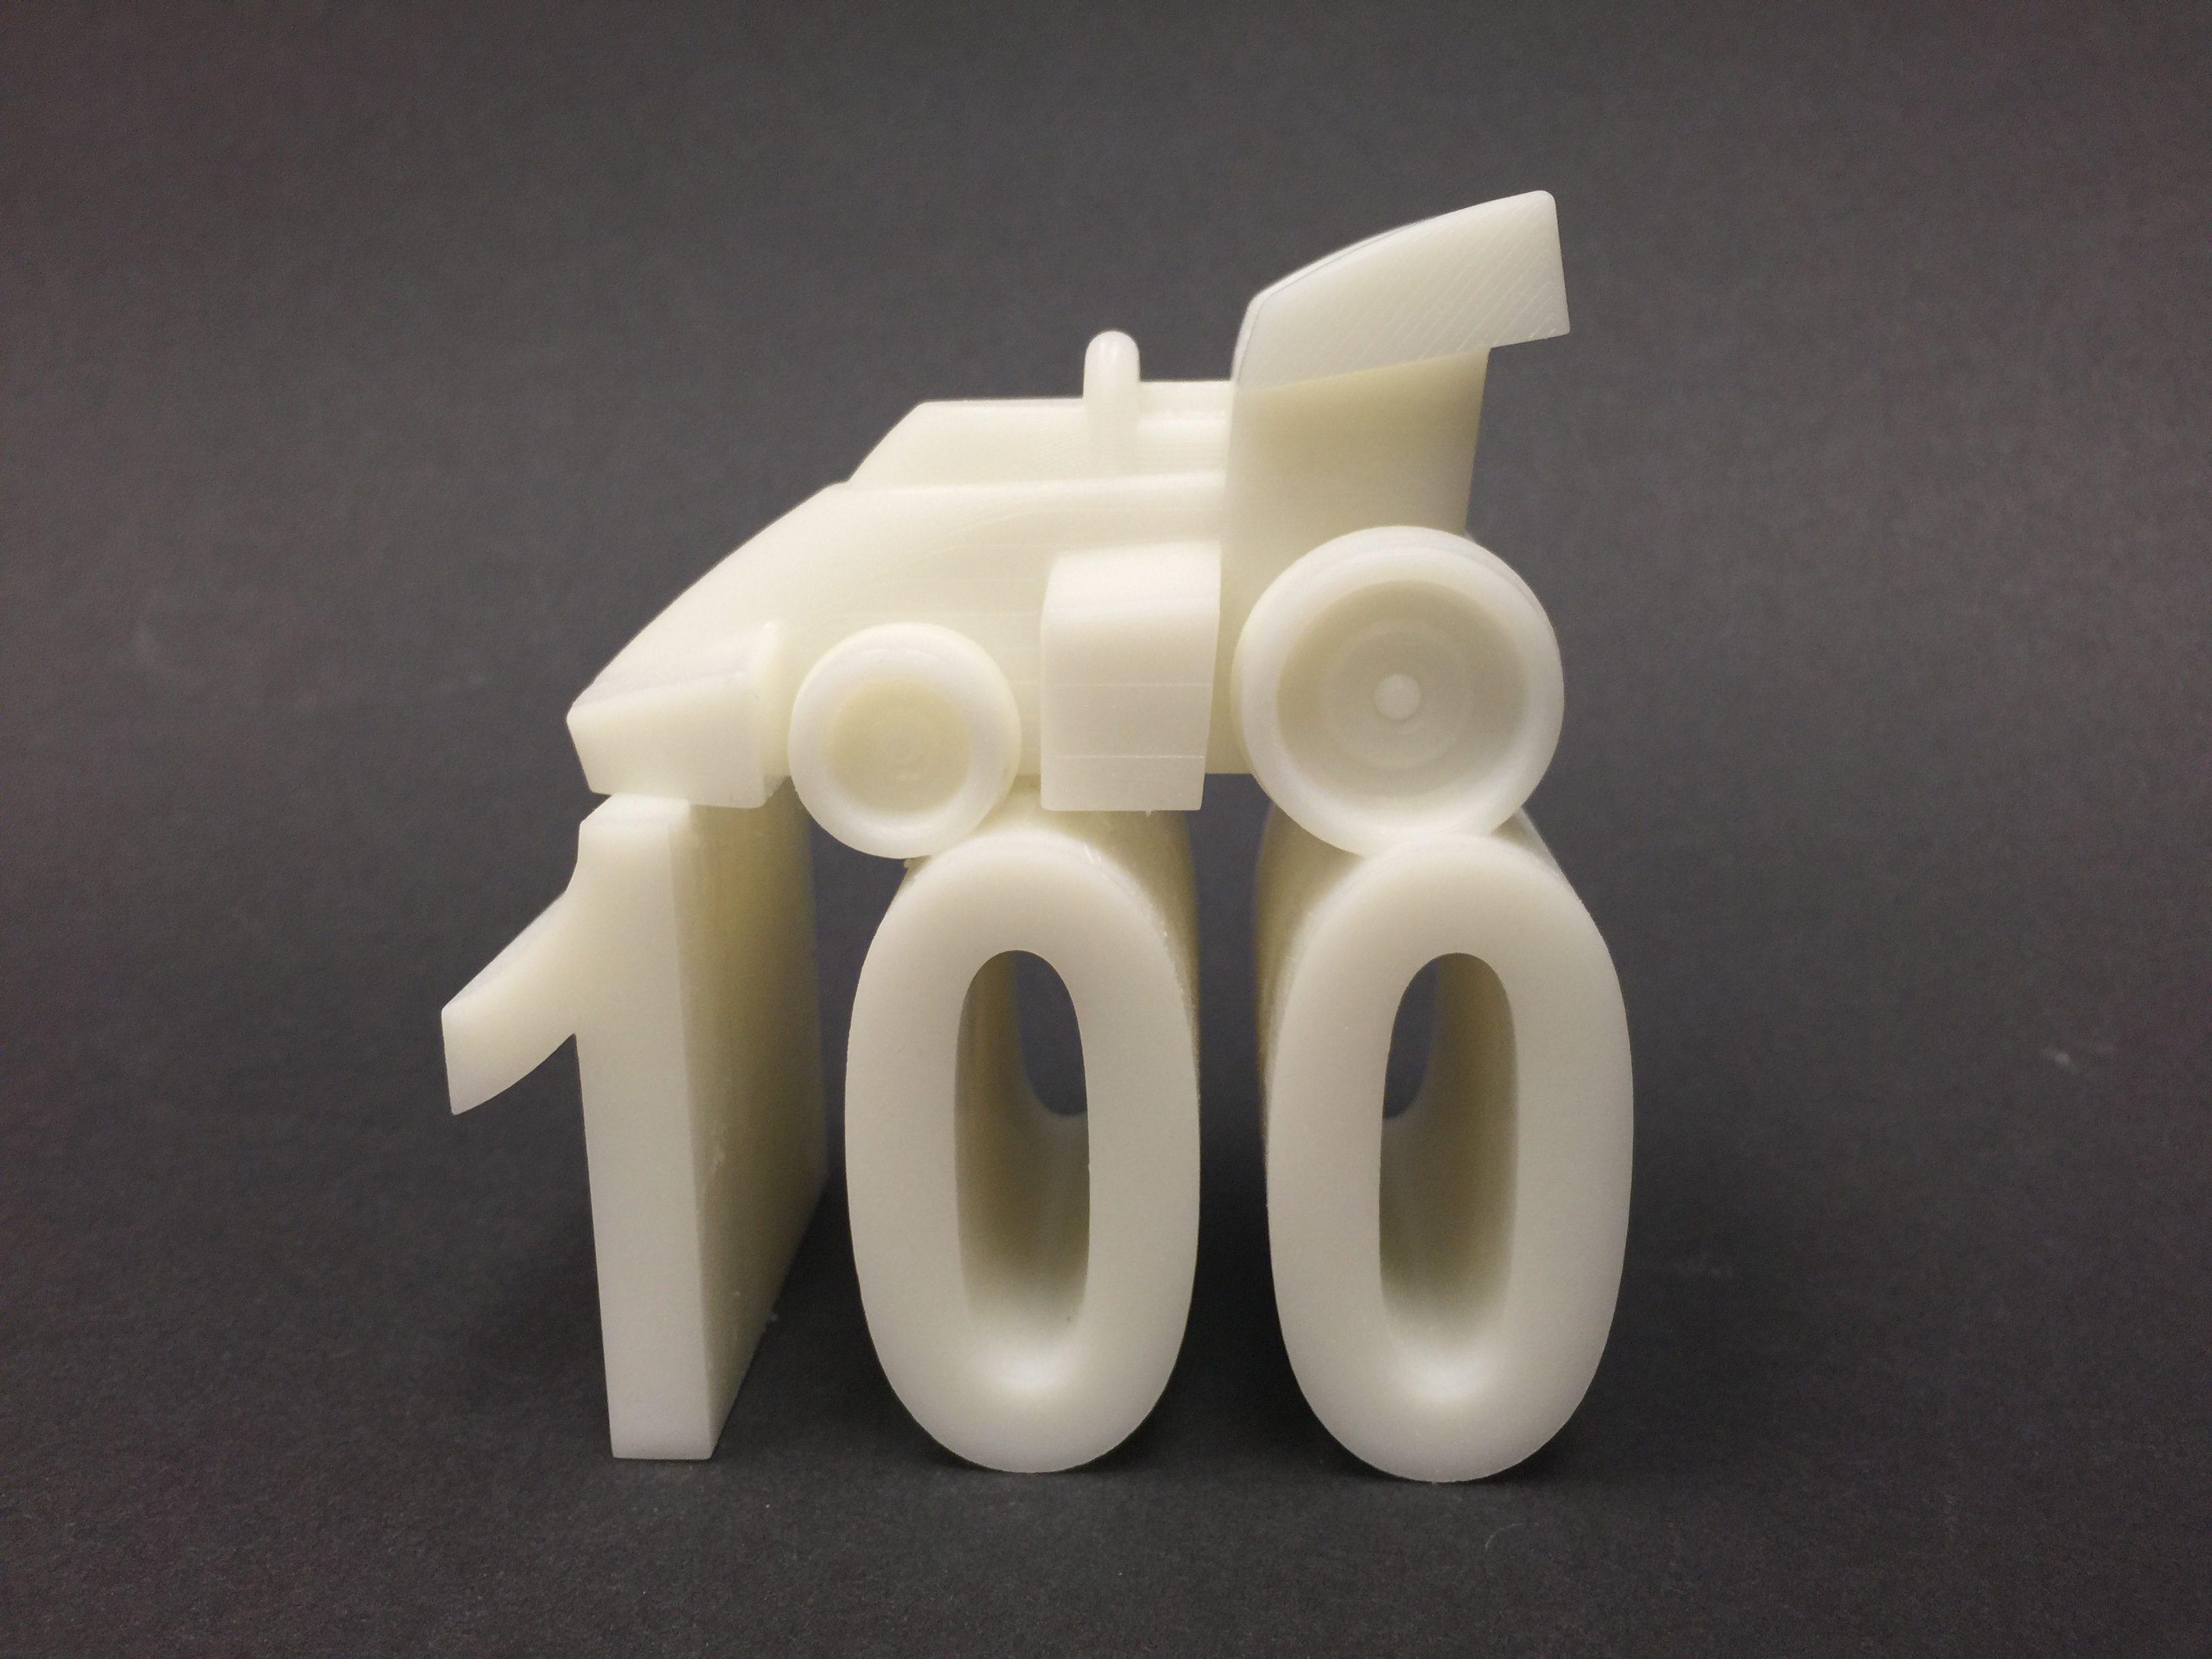 3D Printed 100th running of the Indy 500